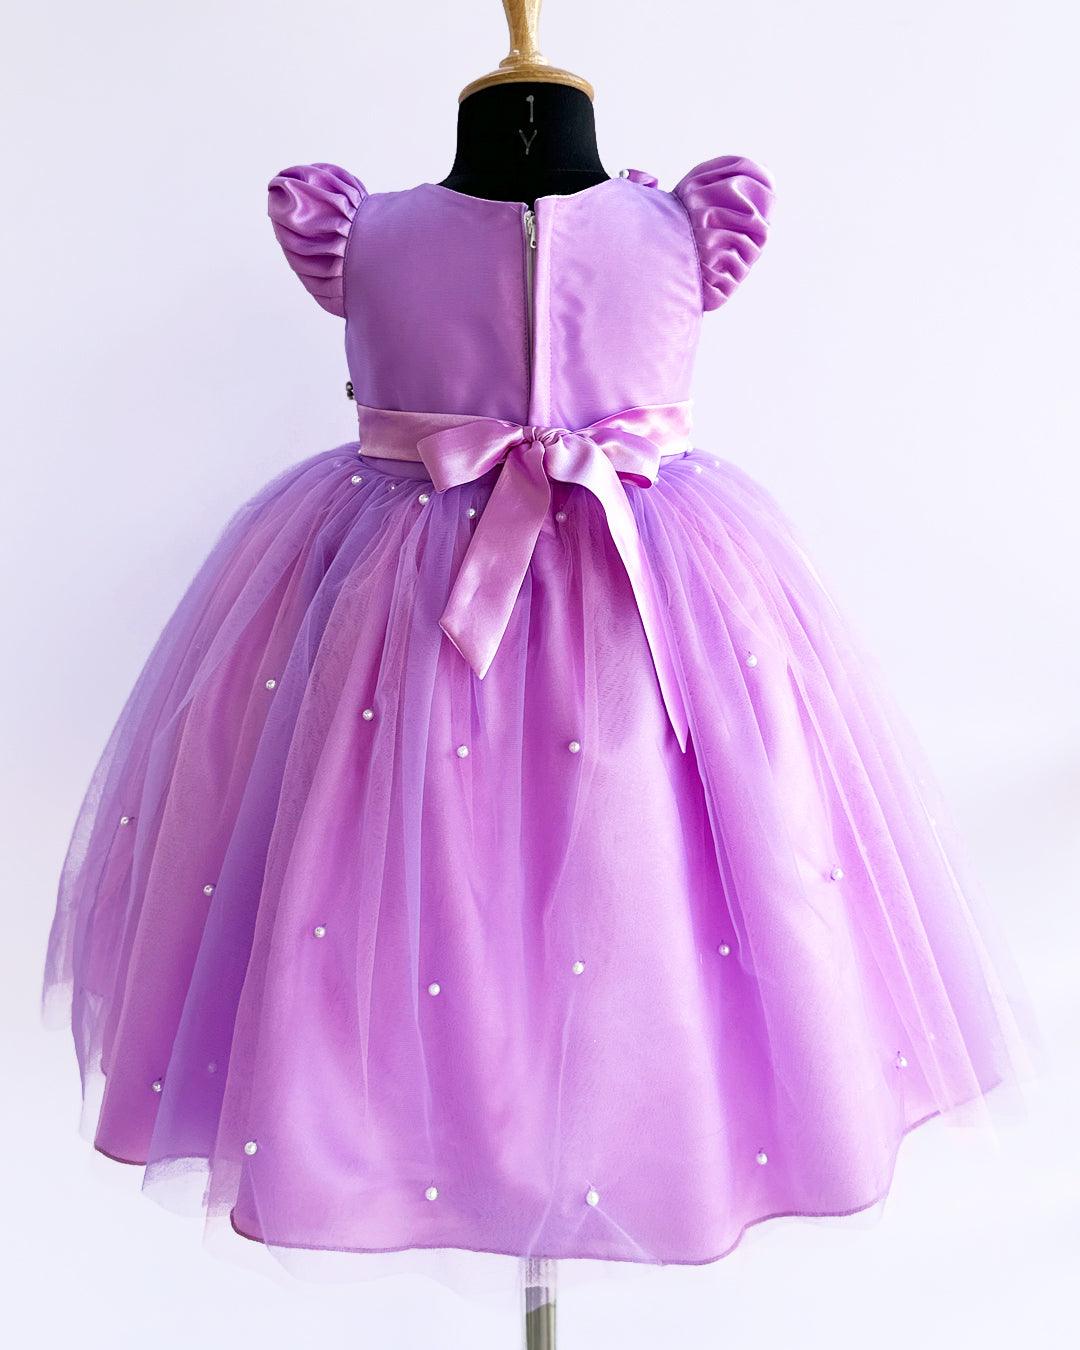 Lilac & lavender Combo Handwork Layer frock
Material : Lilac colour premium ultra satin fabric with matching Lavender and Baby pink combination mono net is used for making this frock. Yoke portion is designed